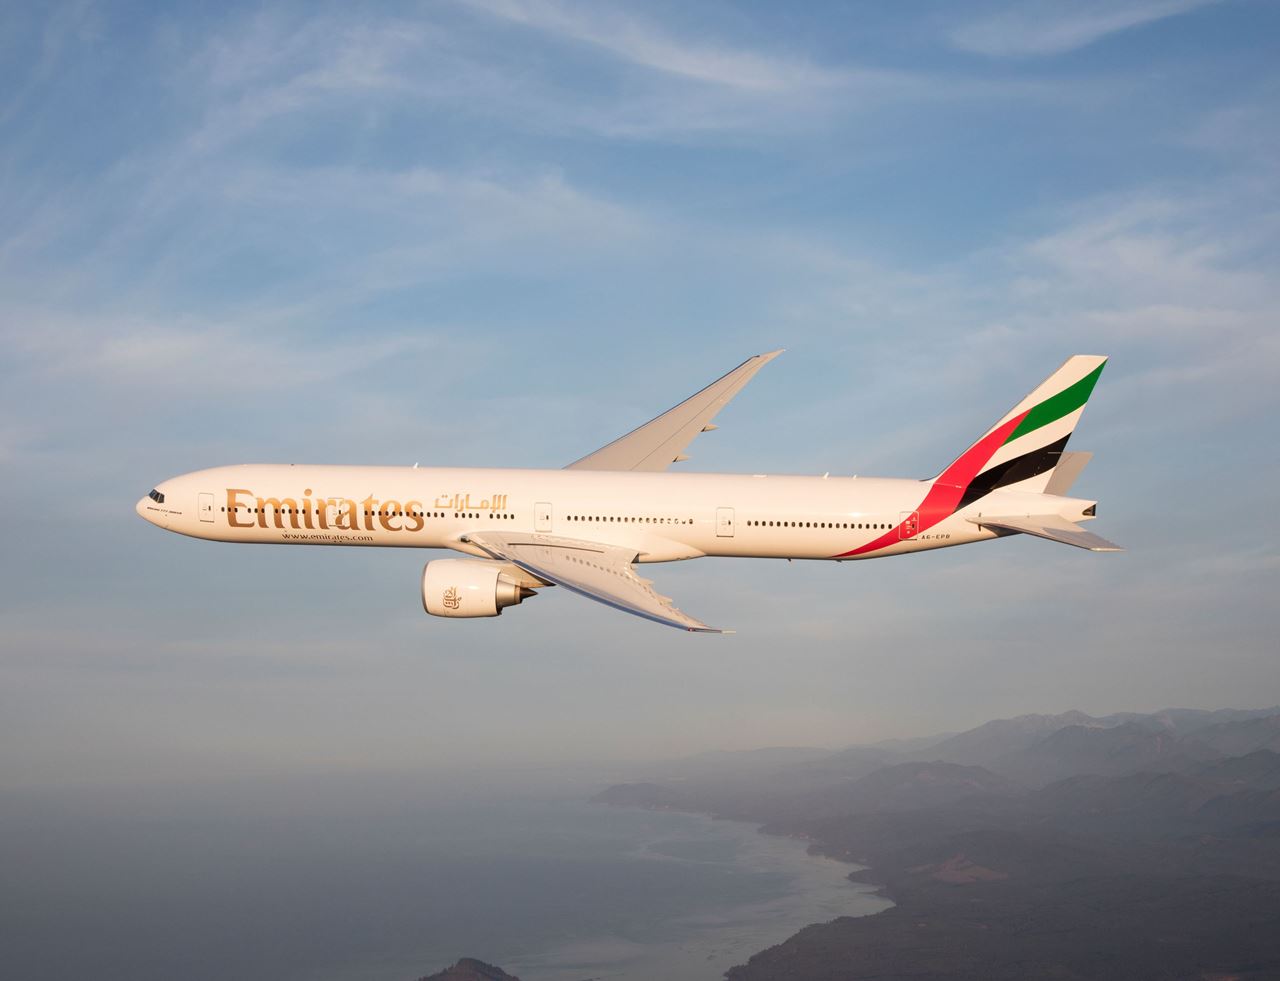 Emirates Holidays launches "deposit" packages for travellers in Kuwait